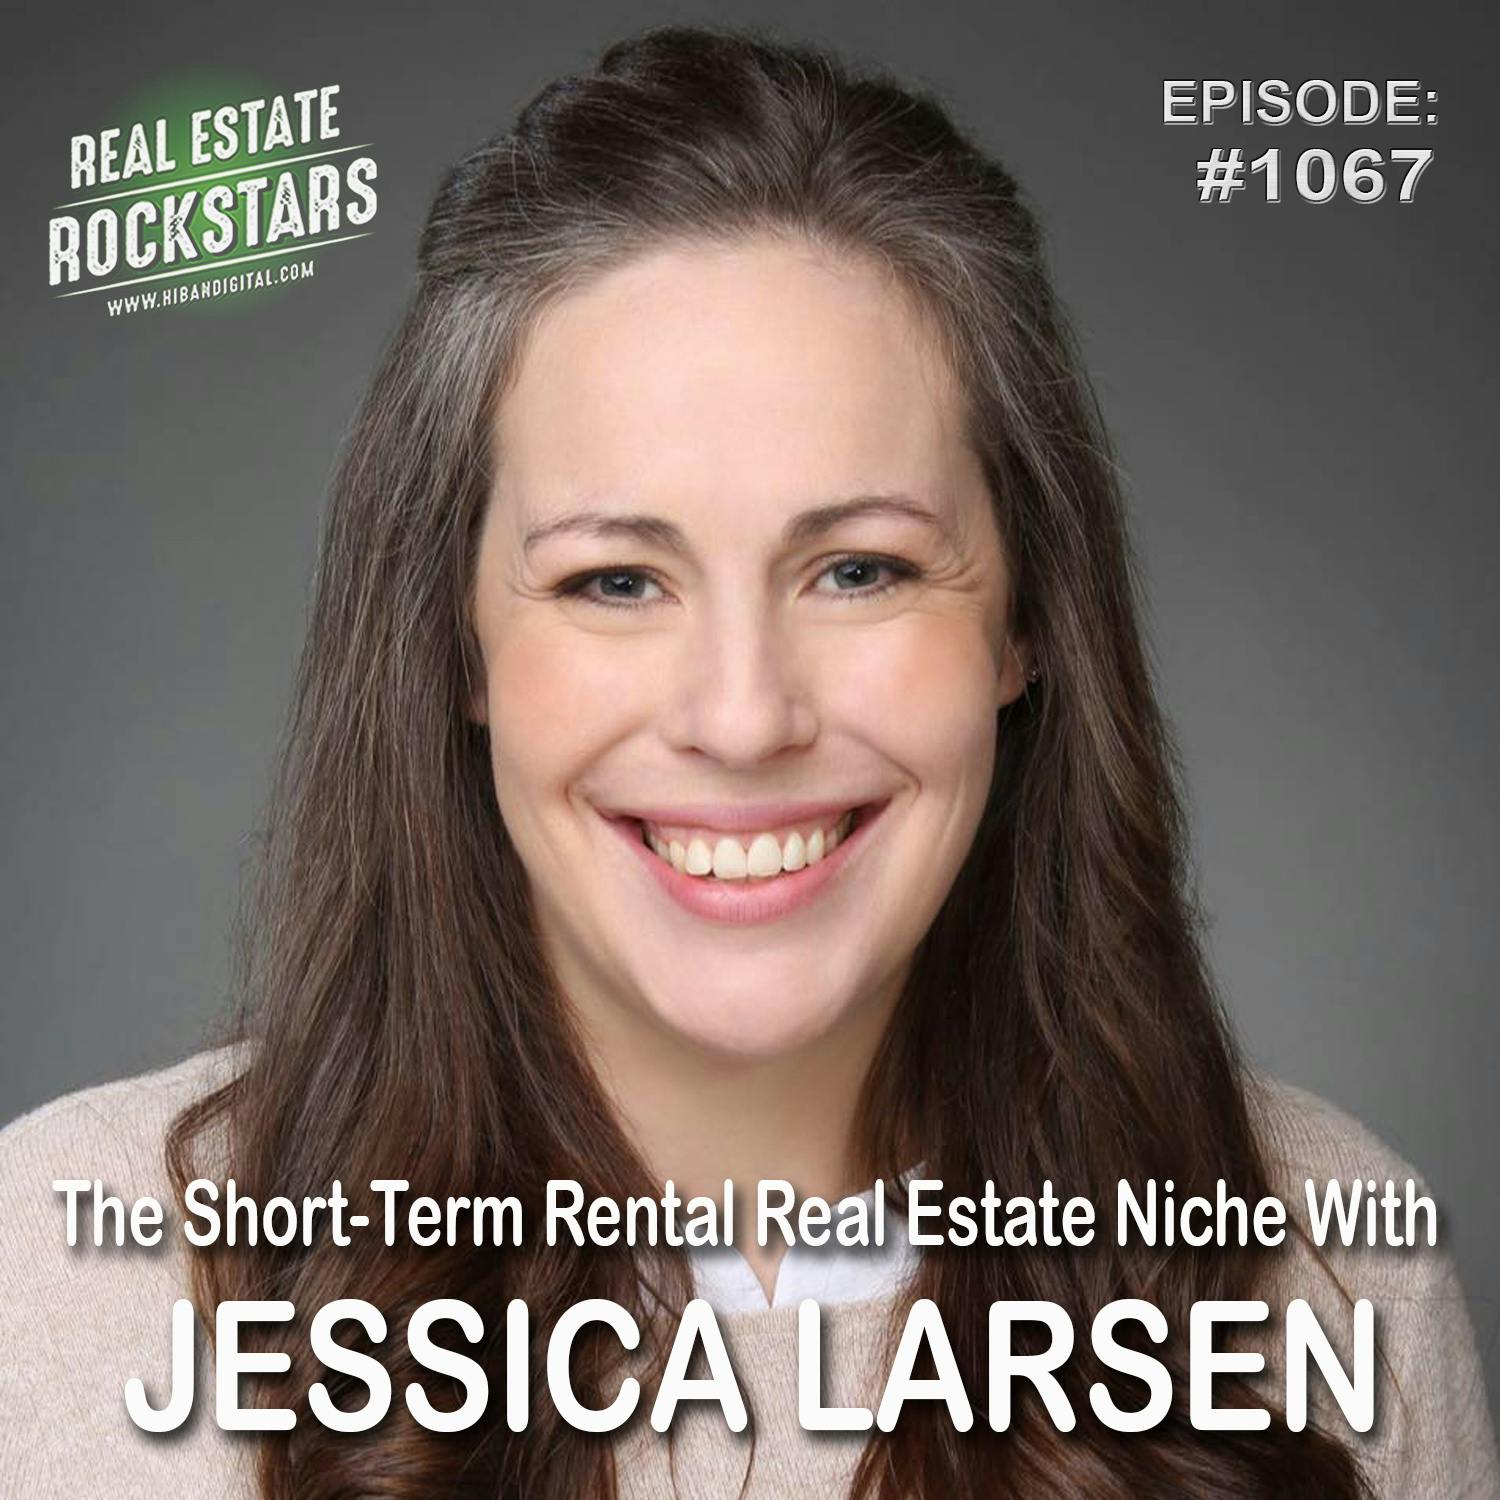 1067: The Short-Term Rental Real Estate Niche With Jessica Larsen